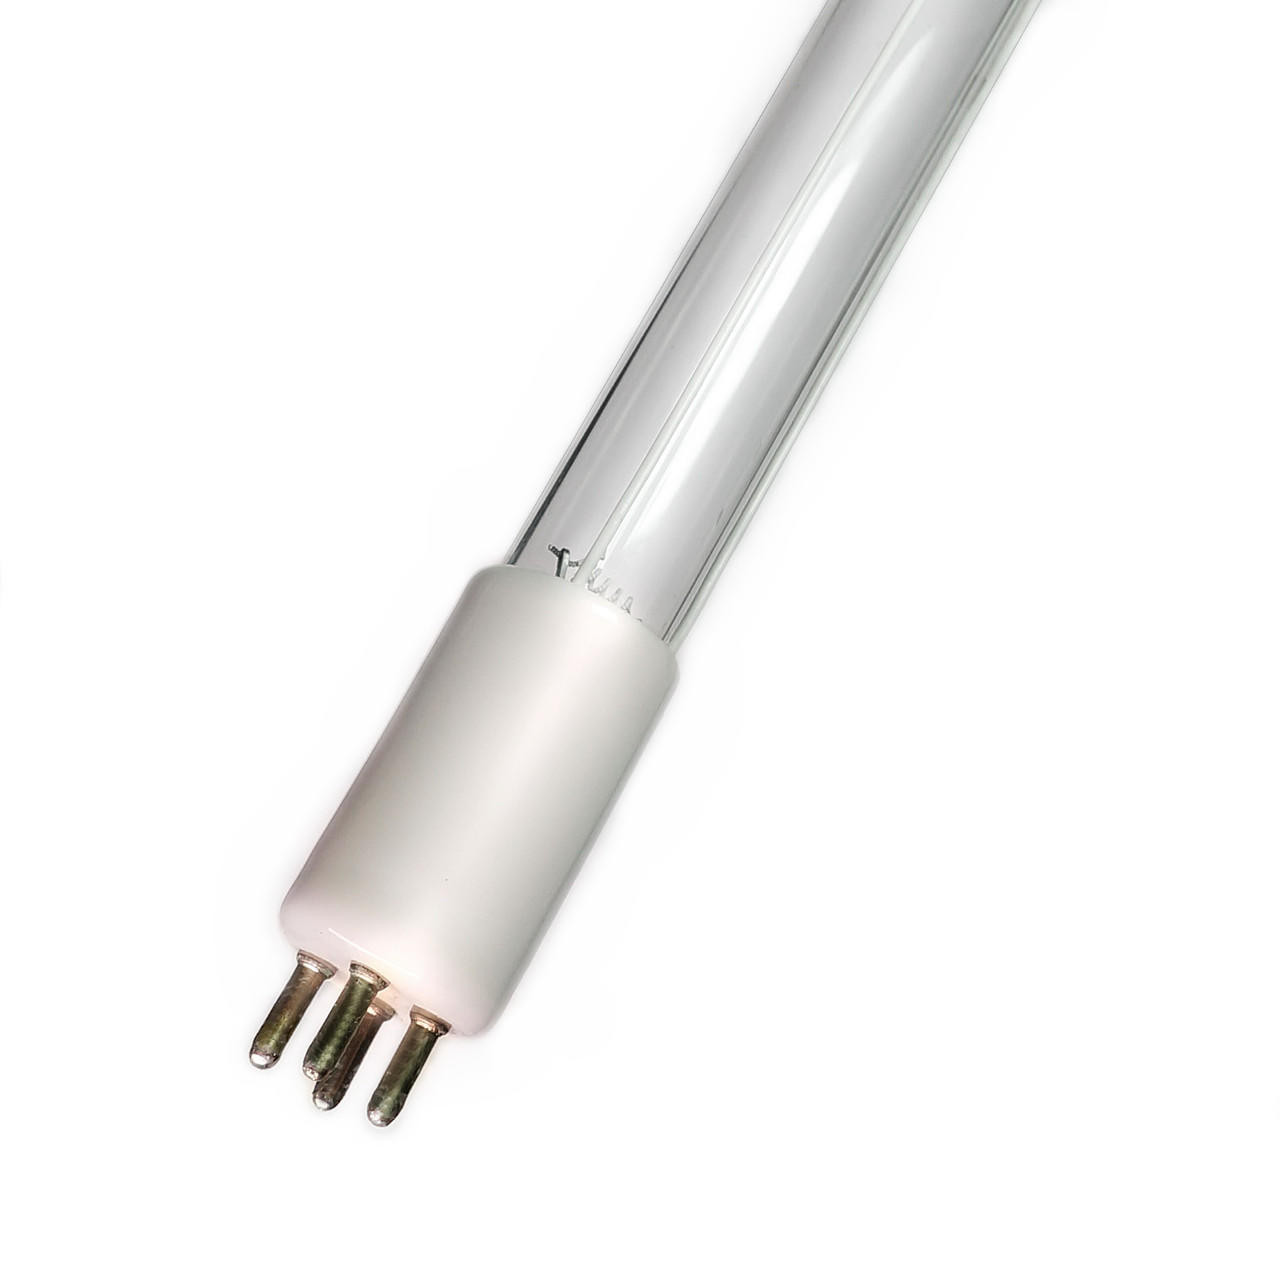 UV4000A-010 UV Dual Output Lamp compatible with Solaxx 57